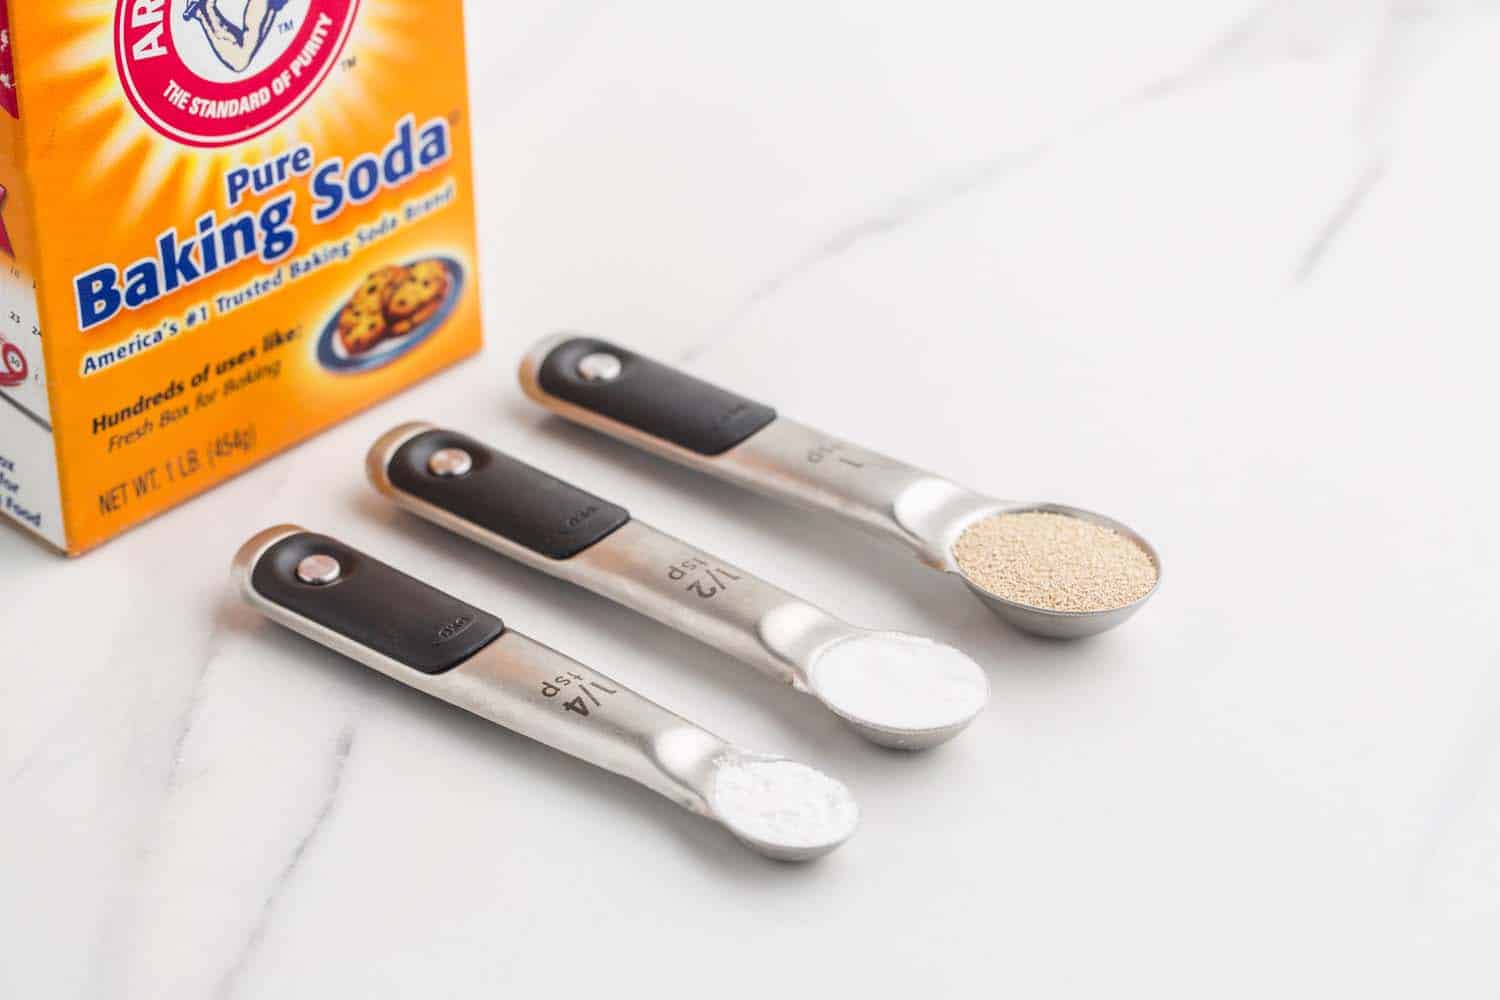 baking powder and soda and yeast in measuring spoons